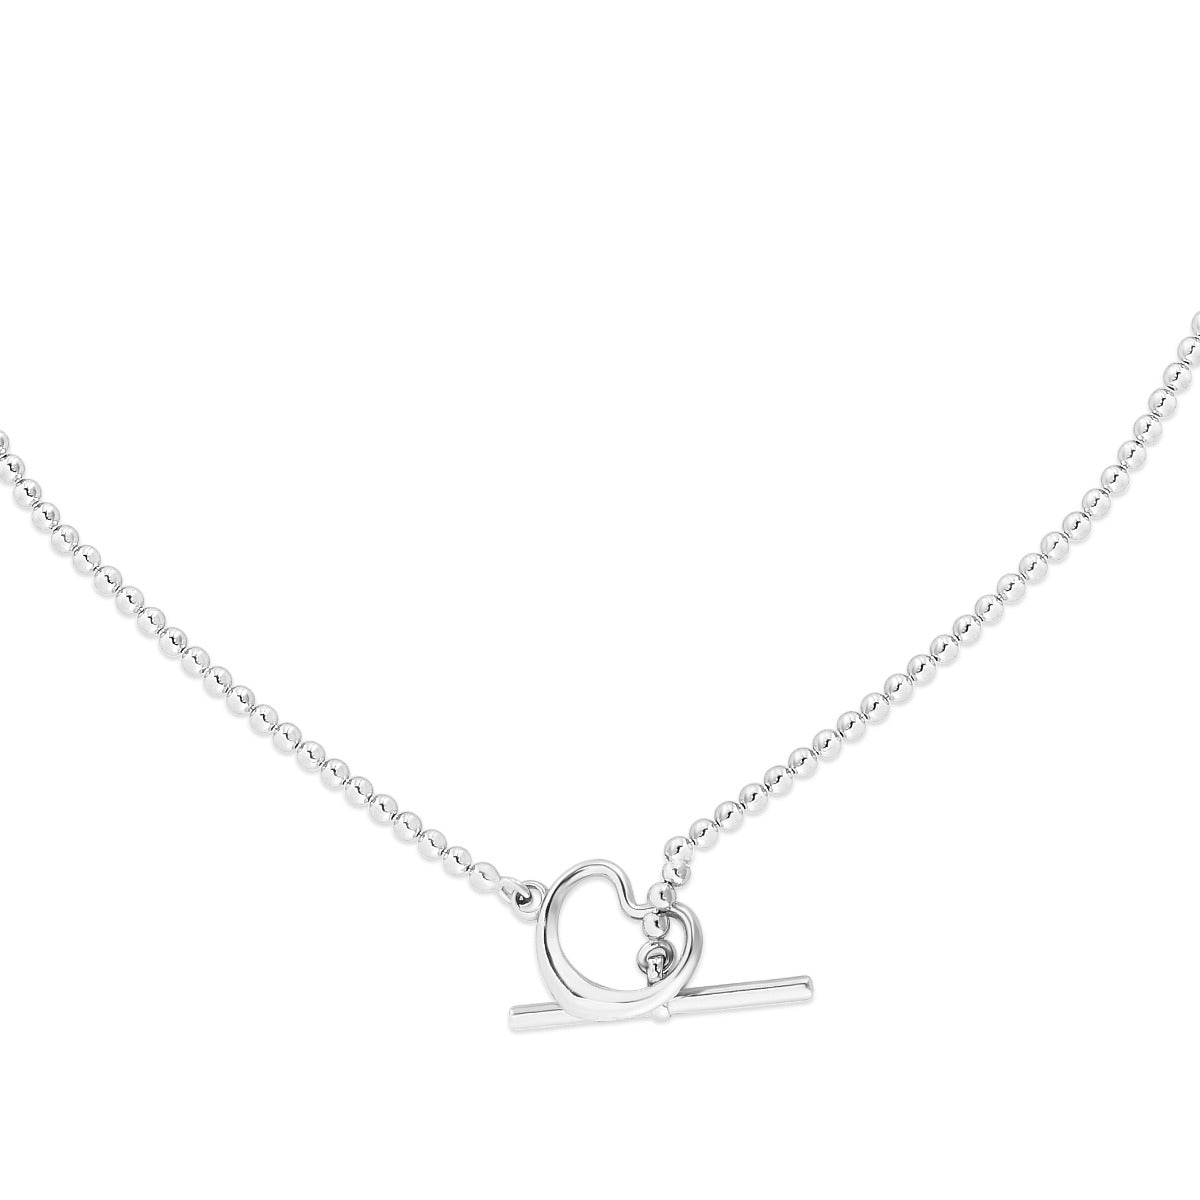 Sterling Silver Polished Heart Necklace with Toggle Clasp